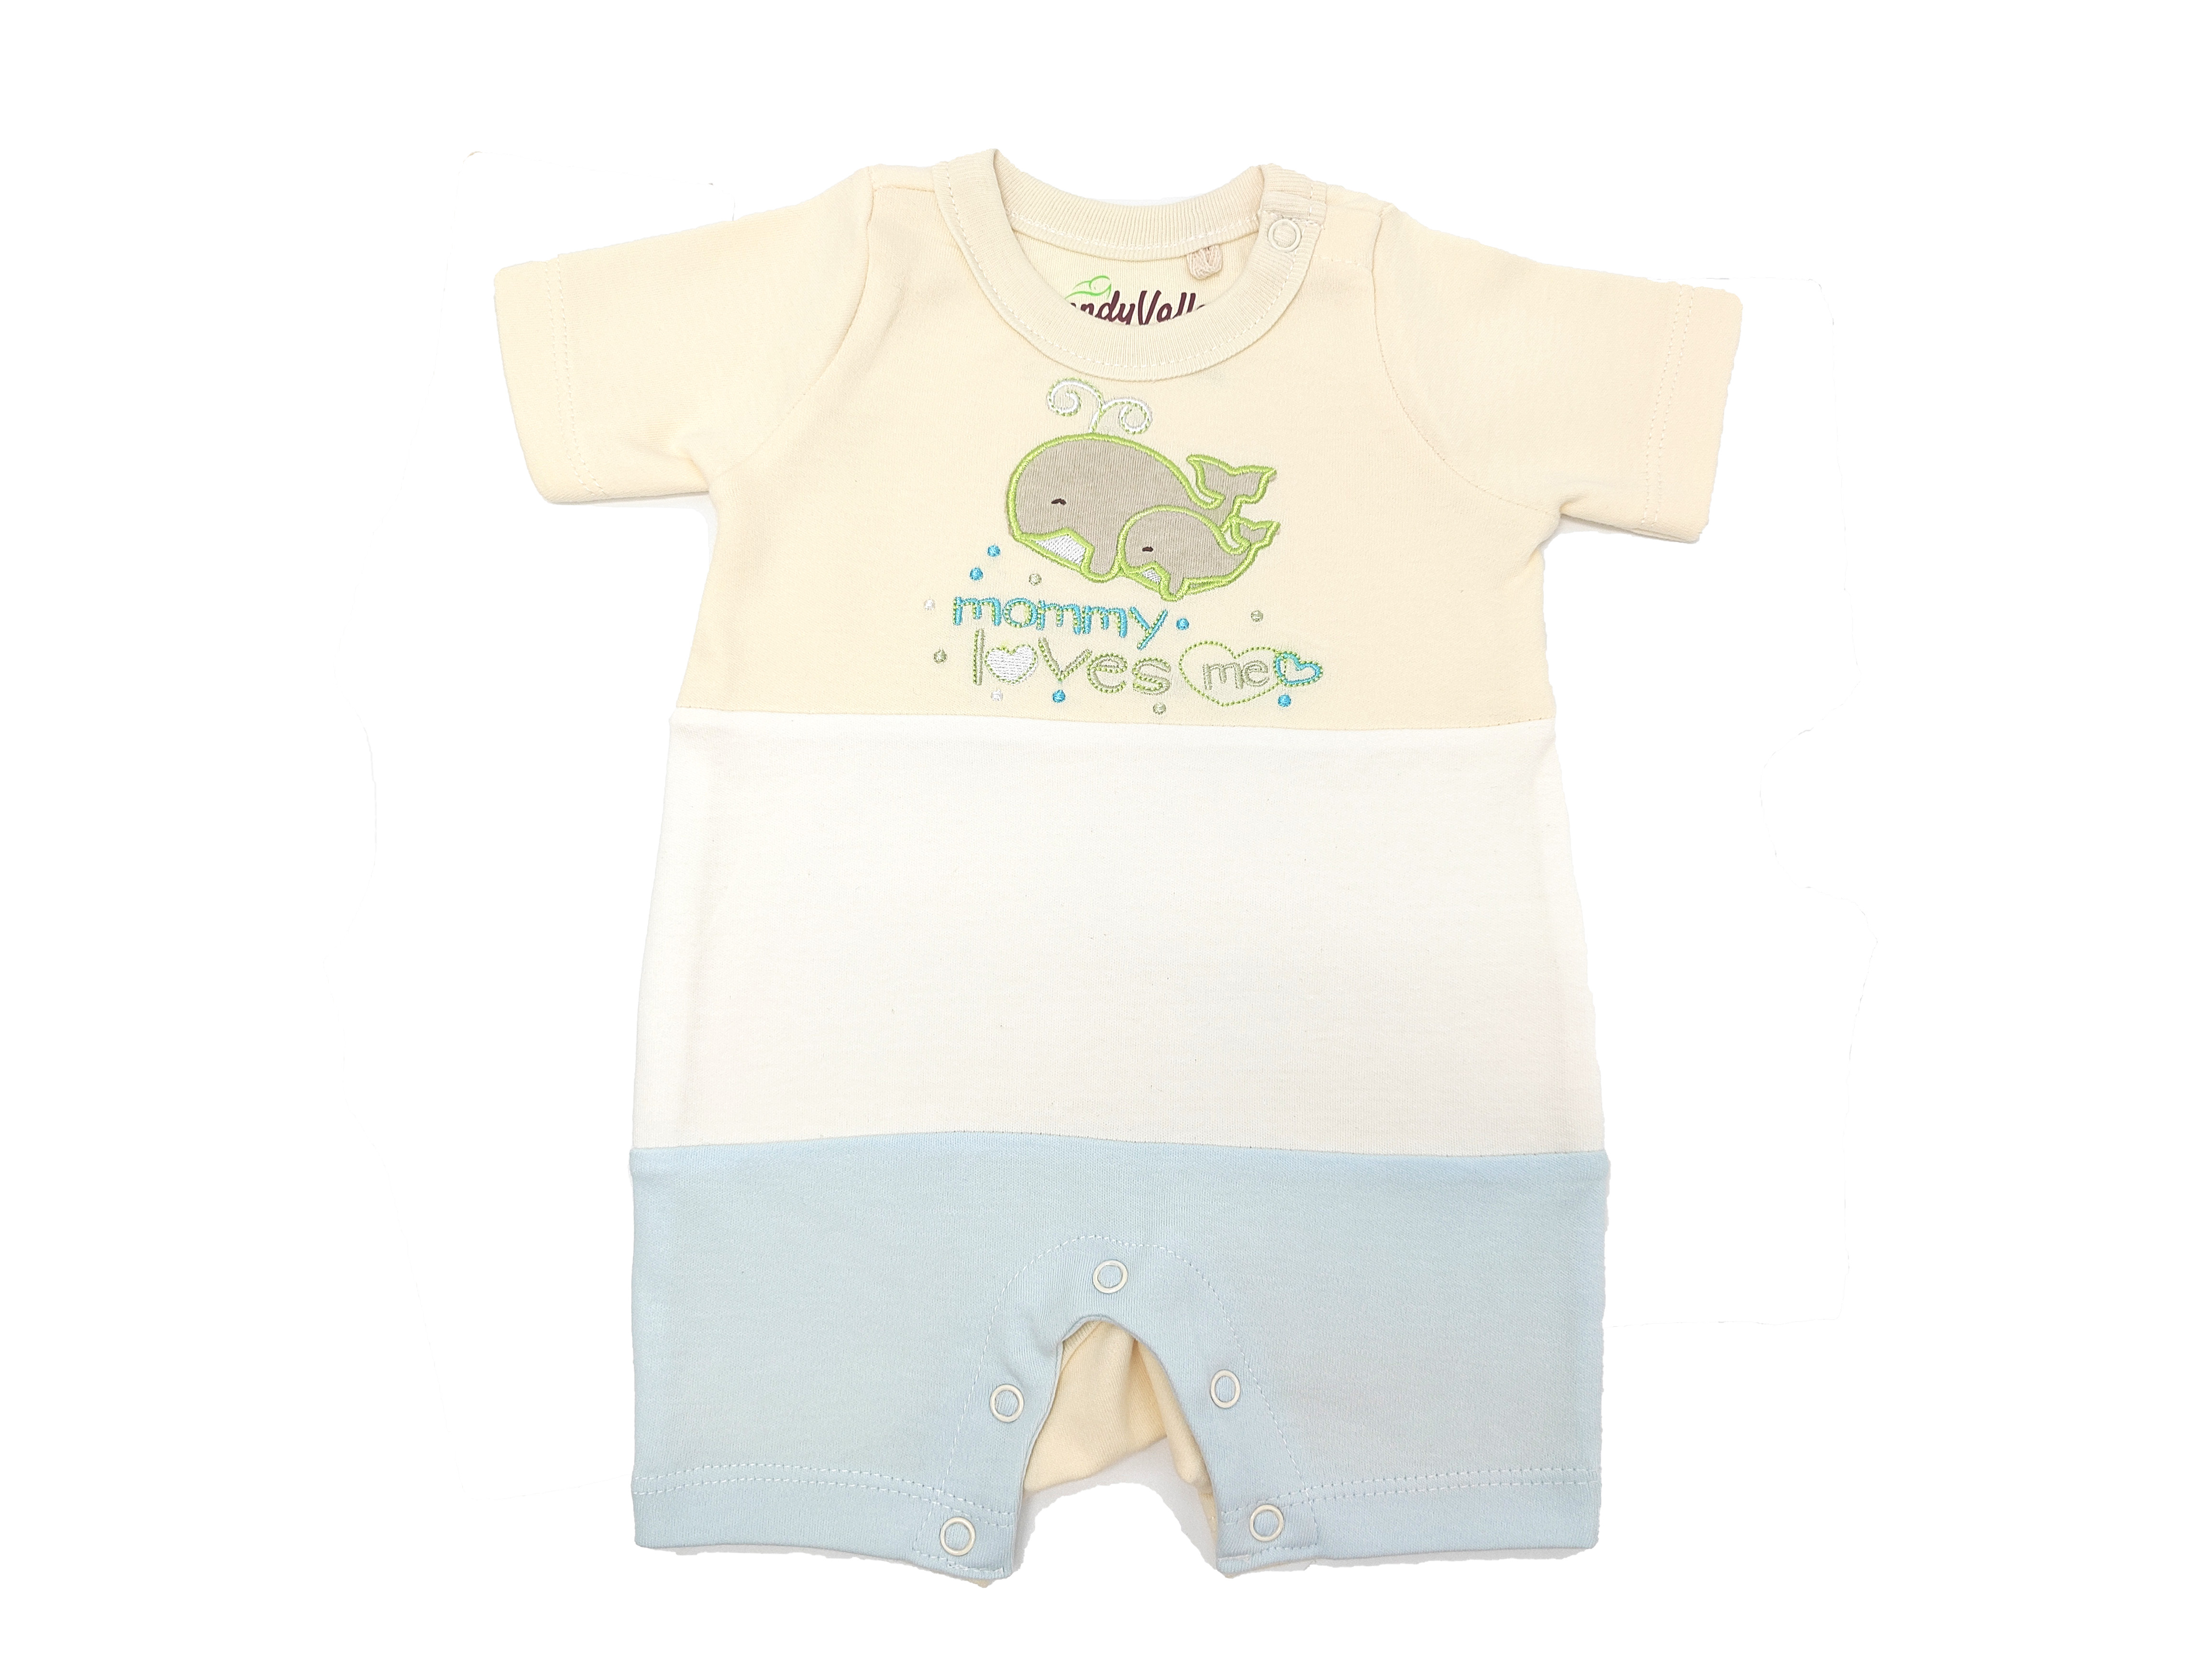 TRENDYVALLEY Organic Cotton Short Sleeve Pants Baby Romper - Whale